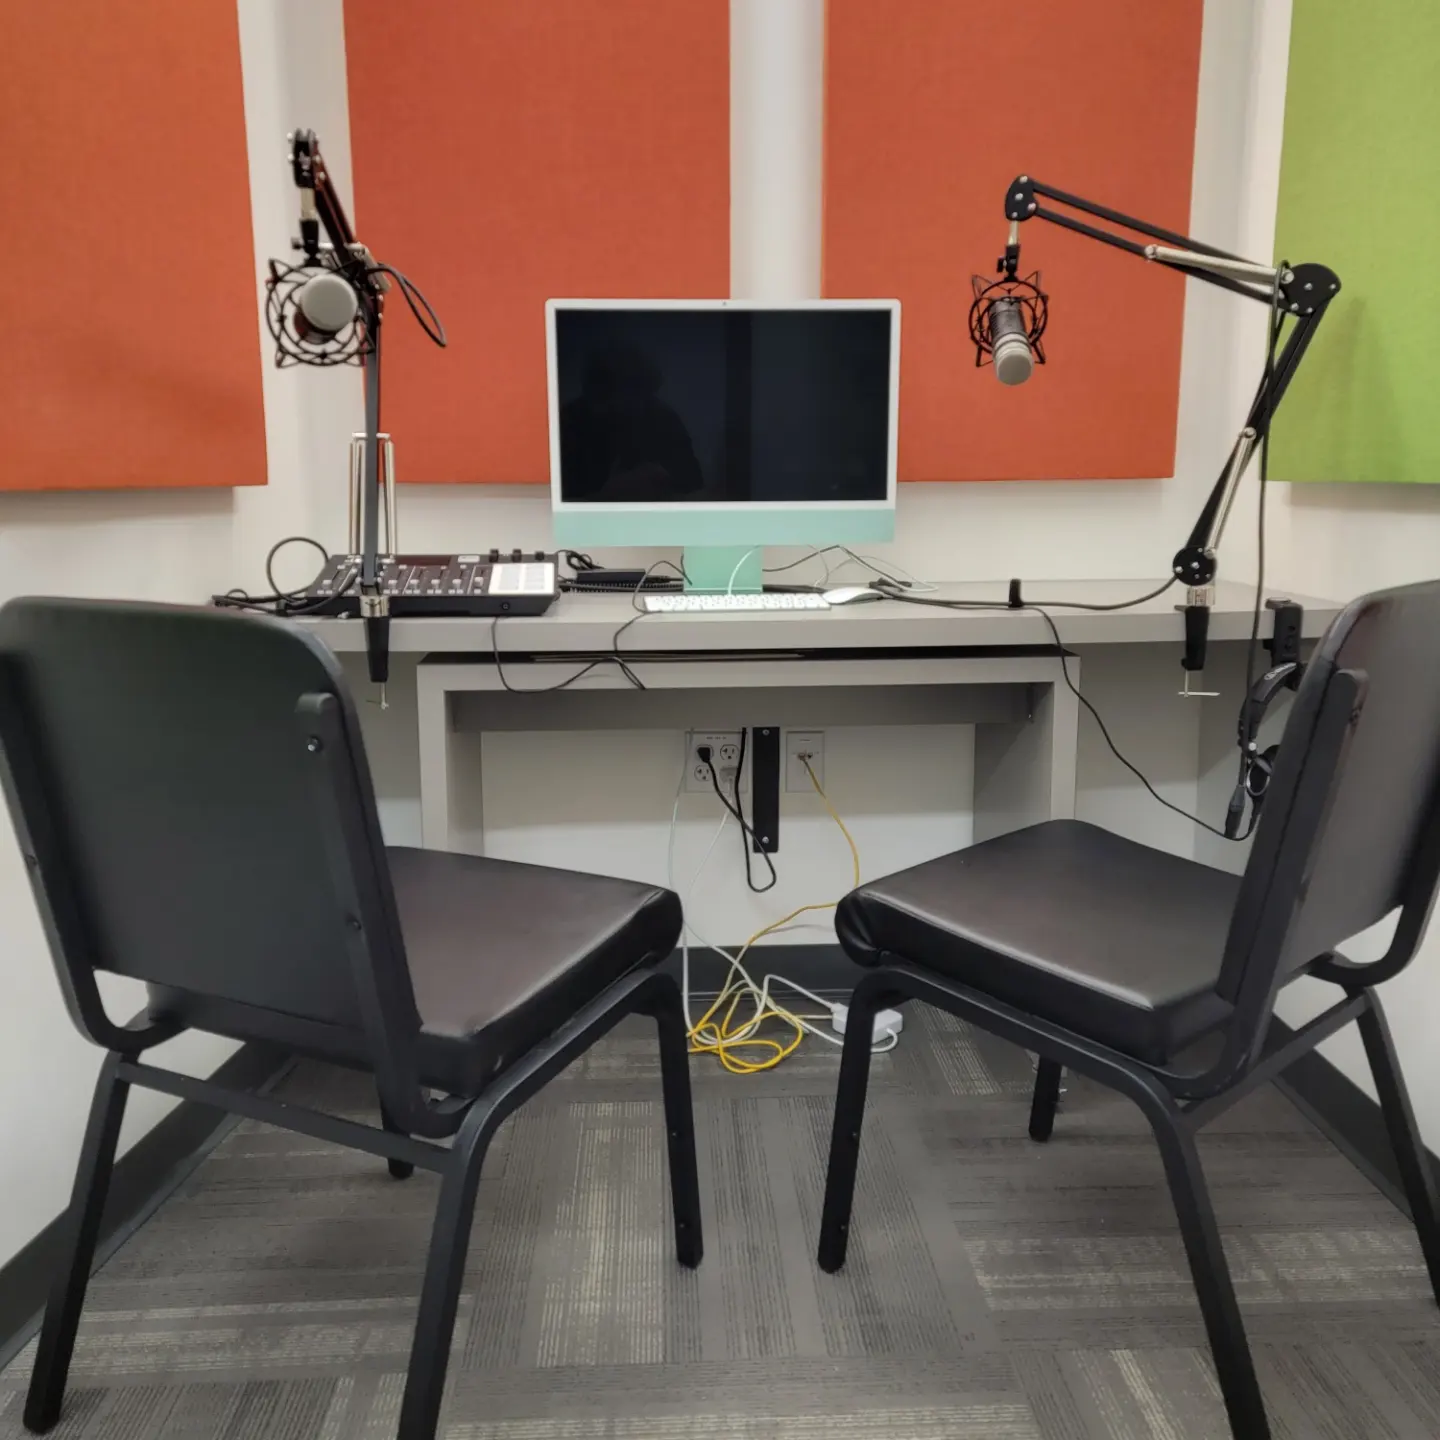 podcast studio with two chairs, iMac, editing equipment and microphones